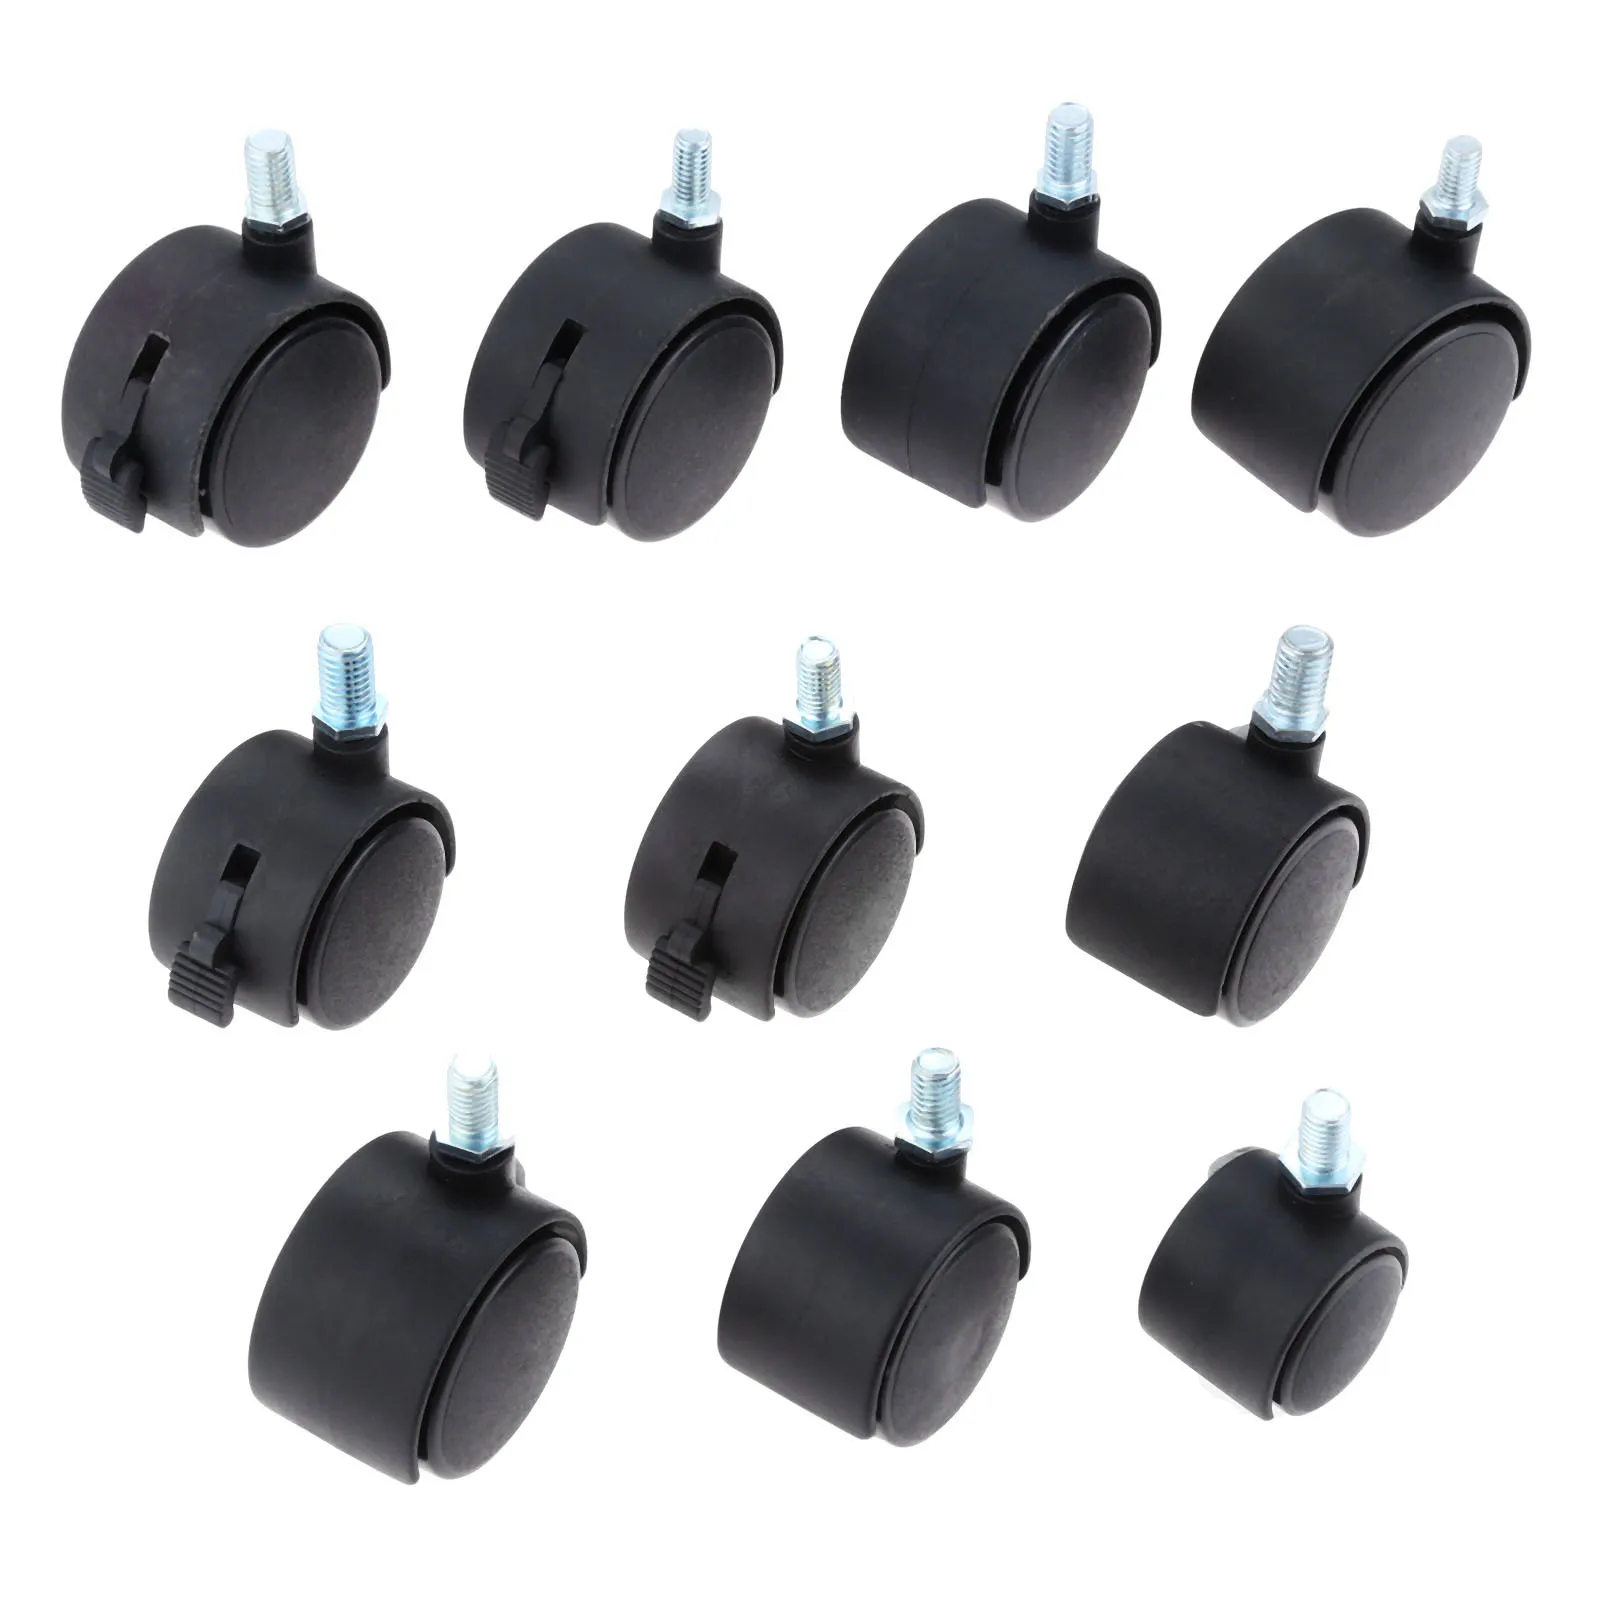 Sliding Wheel Swivel Casters 1/1.25/1.5/2 Inch Rubber 360 Degrees Rotating Rolling Office Computer Chair Hold M8/M10 screws